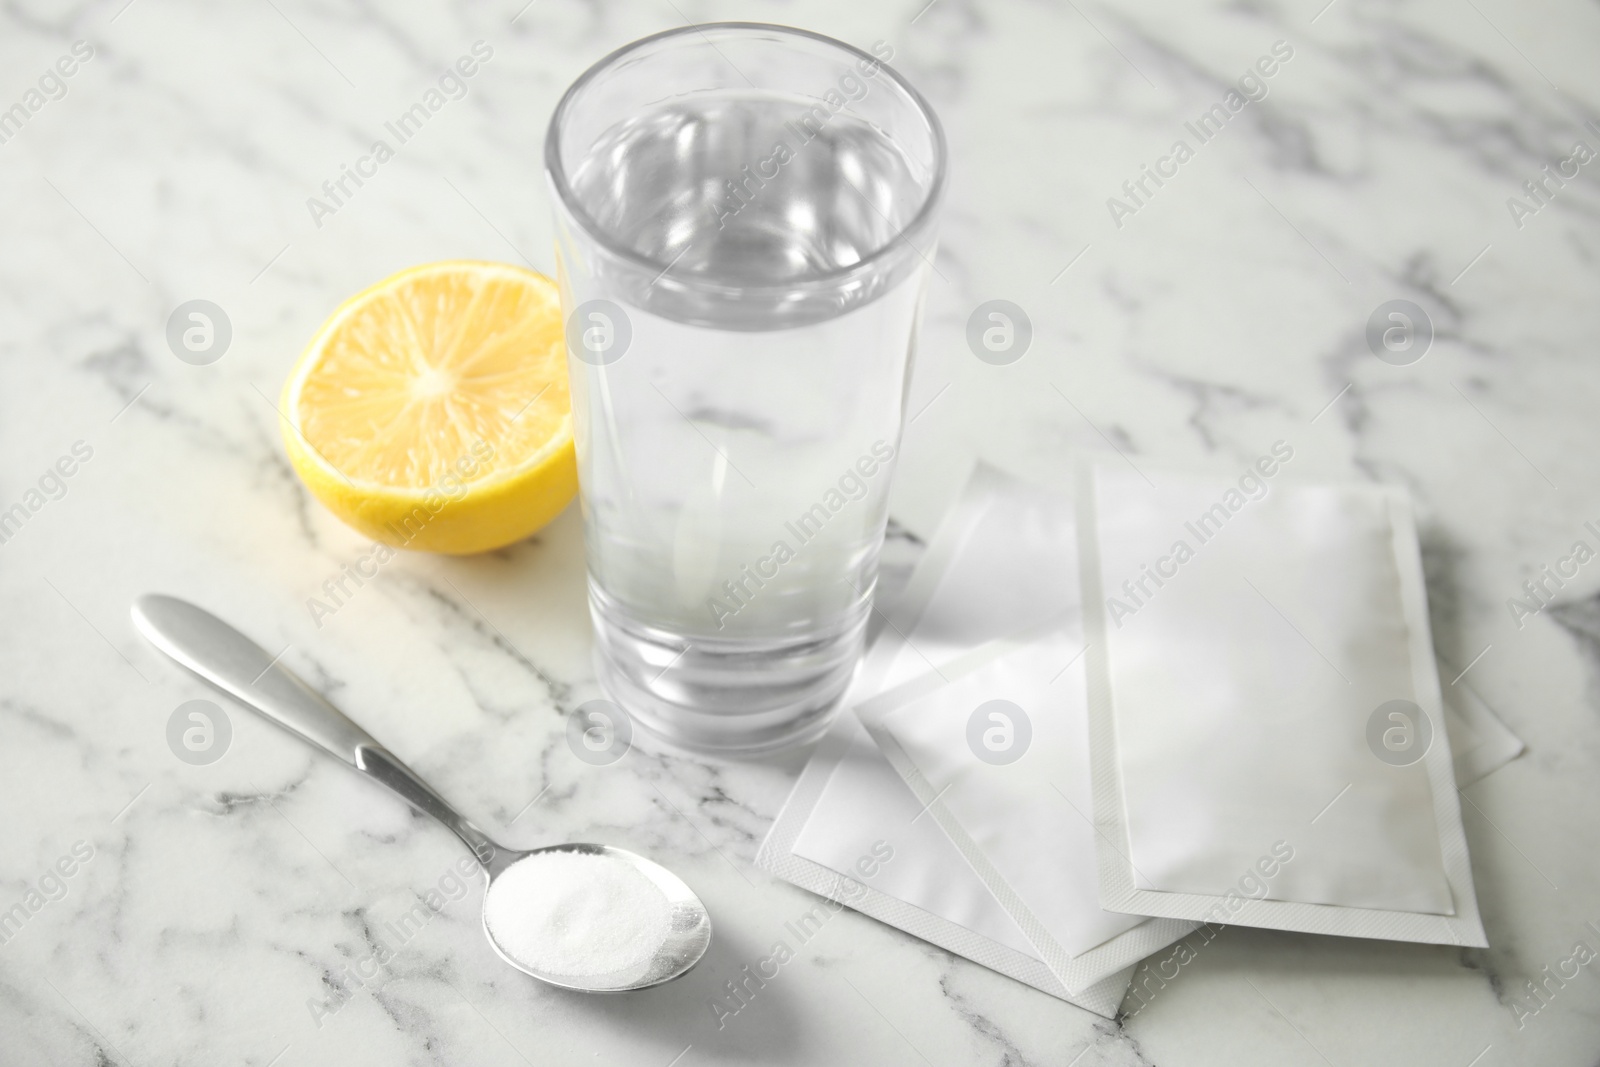 Photo of Medicine sachets, glass of water, spoon and lemon on white table